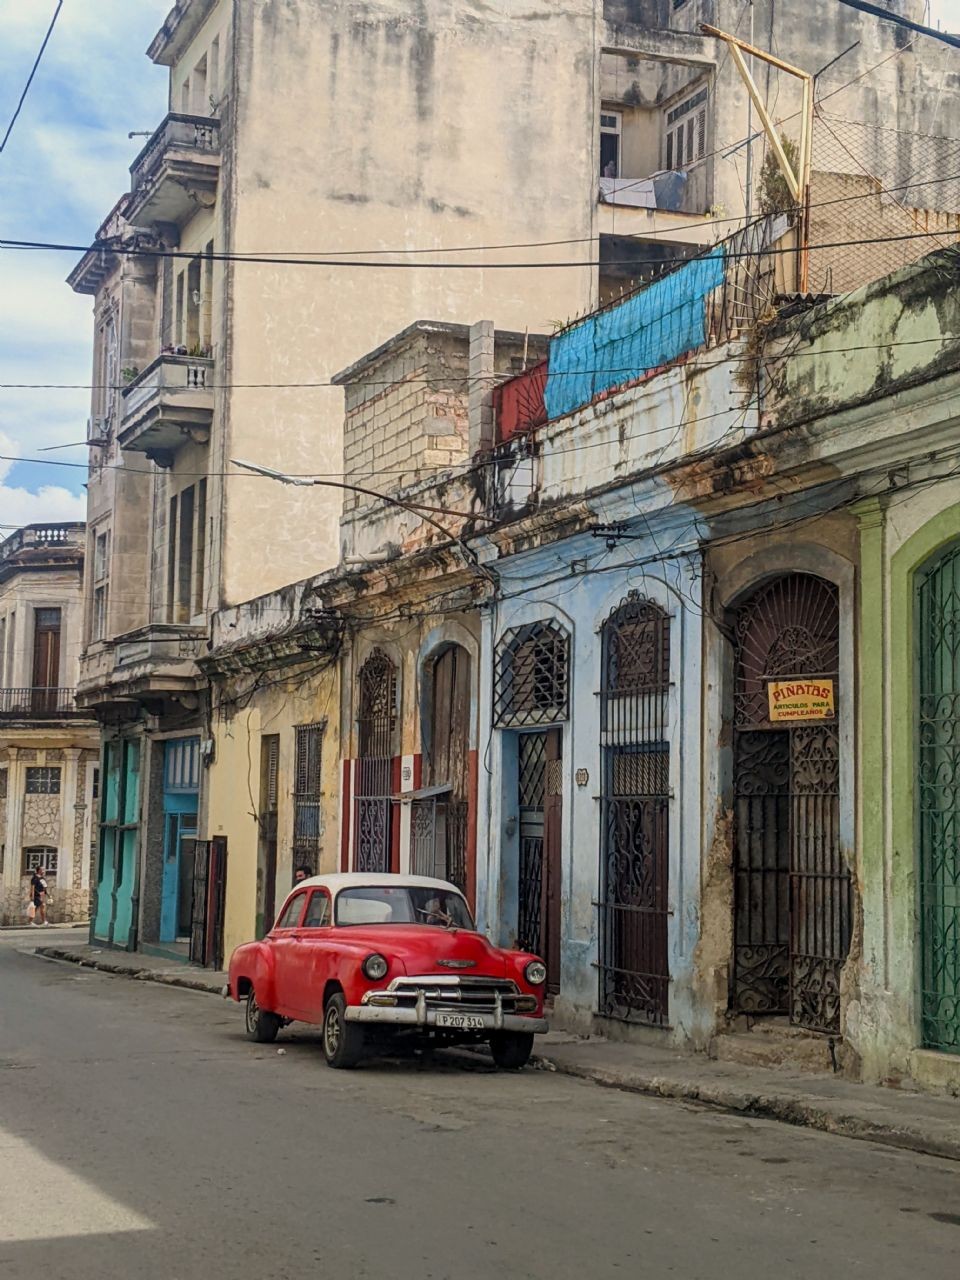 Insurance Requirements for Visitors to Cuba